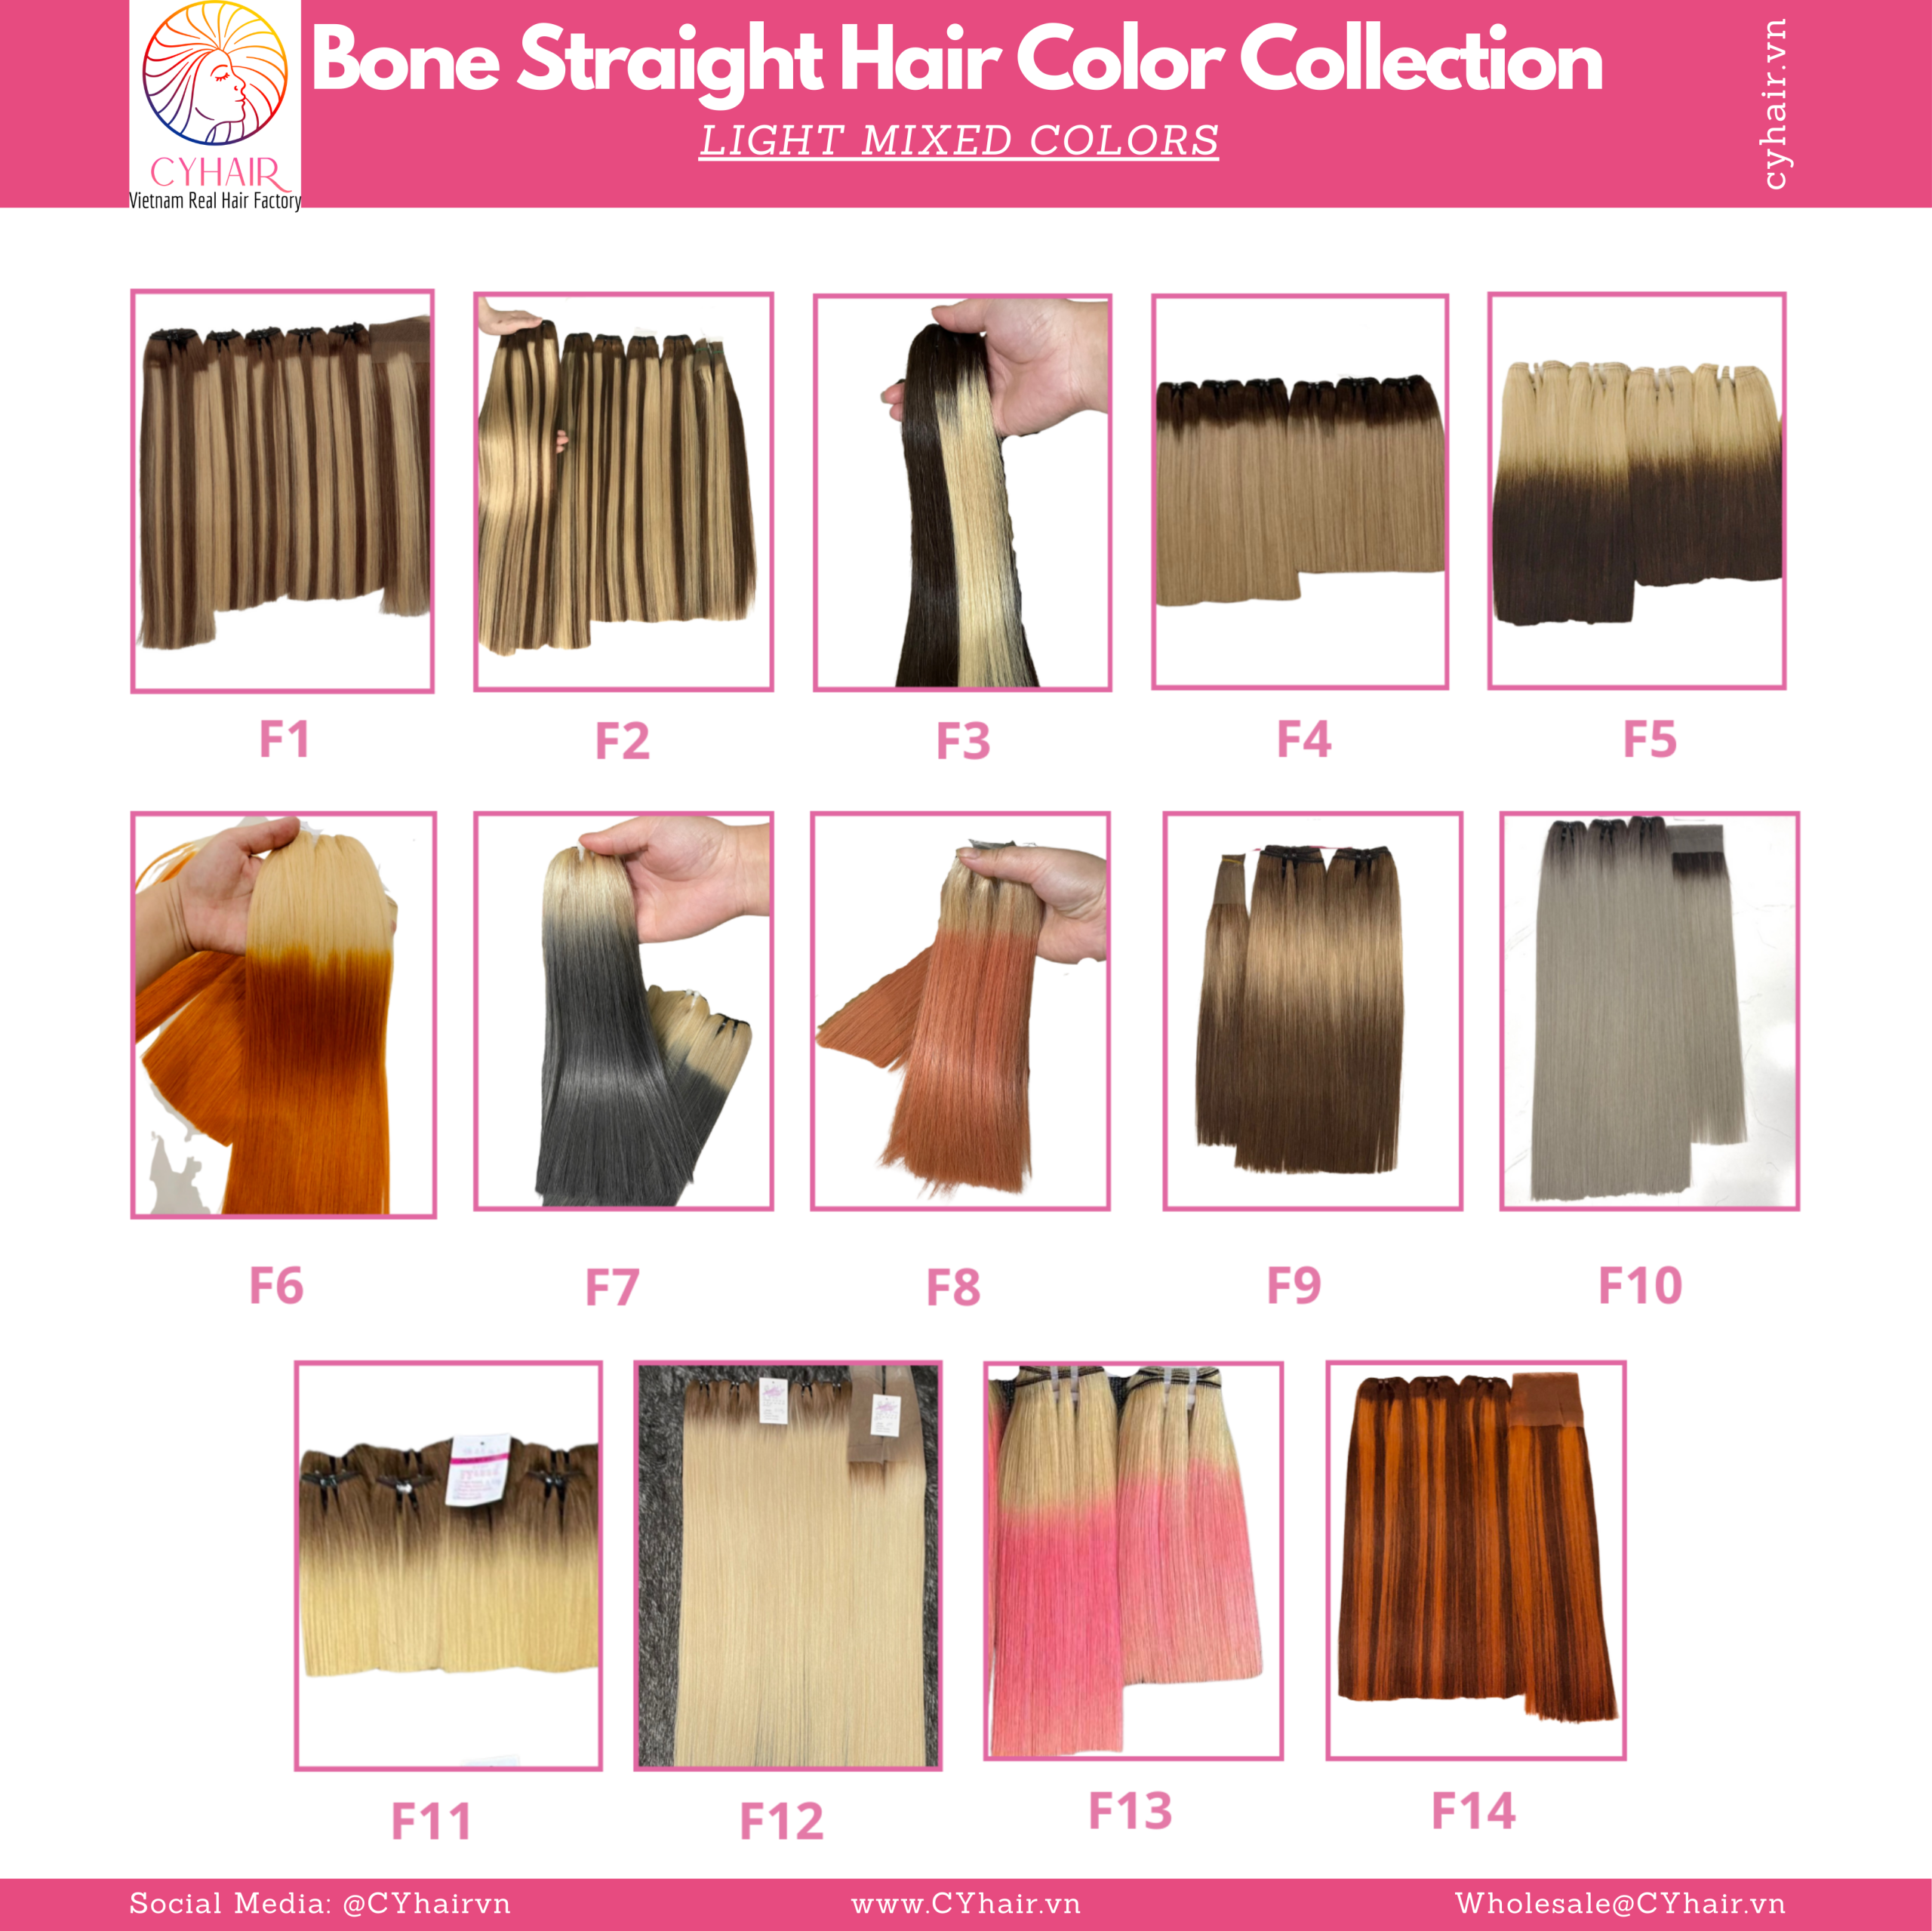 Bone Straight Hair Color Collection - Light Mixed Colors